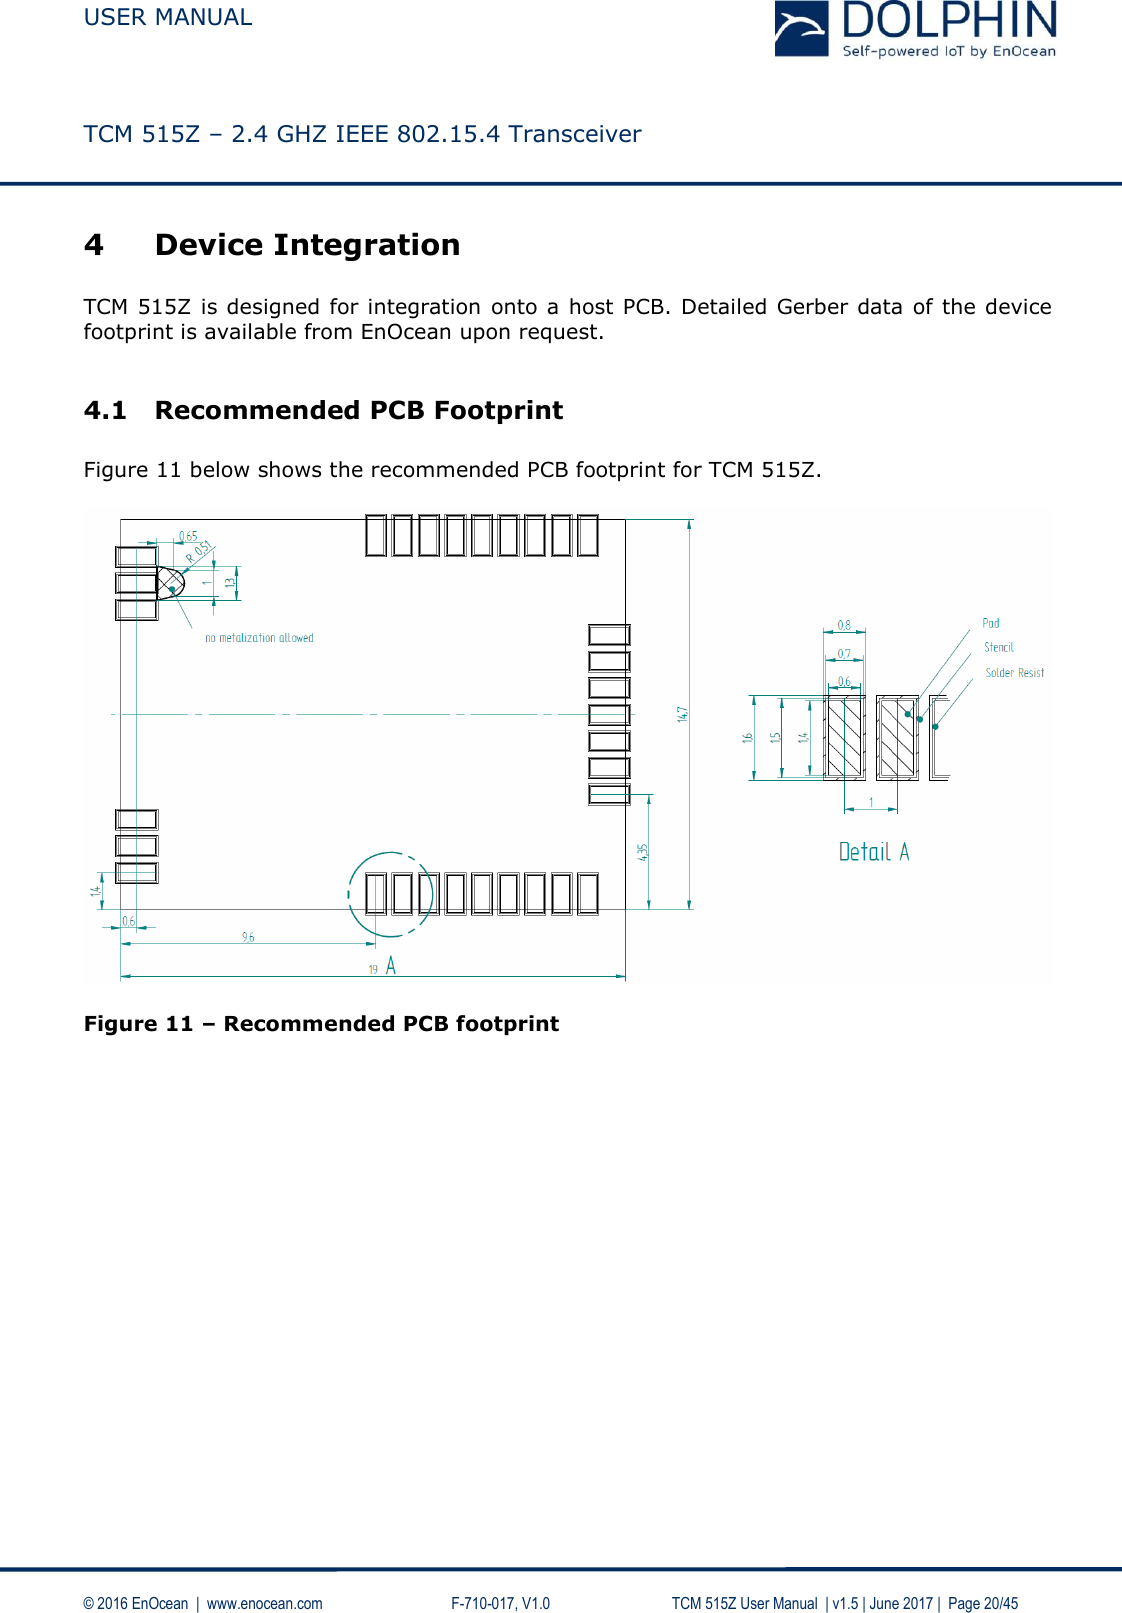  USER MANUAL    TCM 515Z – 2.4 GHZ IEEE 802.15.4 Transceiver   © 2016 EnOcean  |  www.enocean.com     F-710-017, V1.0        TCM 515Z User Manual  | v1.5 | June 2017 |  Page 20/45 4 Device Integration  TCM 515Z is designed for integration  onto a host PCB. Detailed Gerber data of the device footprint is available from EnOcean upon request.   4.1 Recommended PCB Footprint  Figure 11 below shows the recommended PCB footprint for TCM 515Z.     Figure 11 – Recommended PCB footprint      